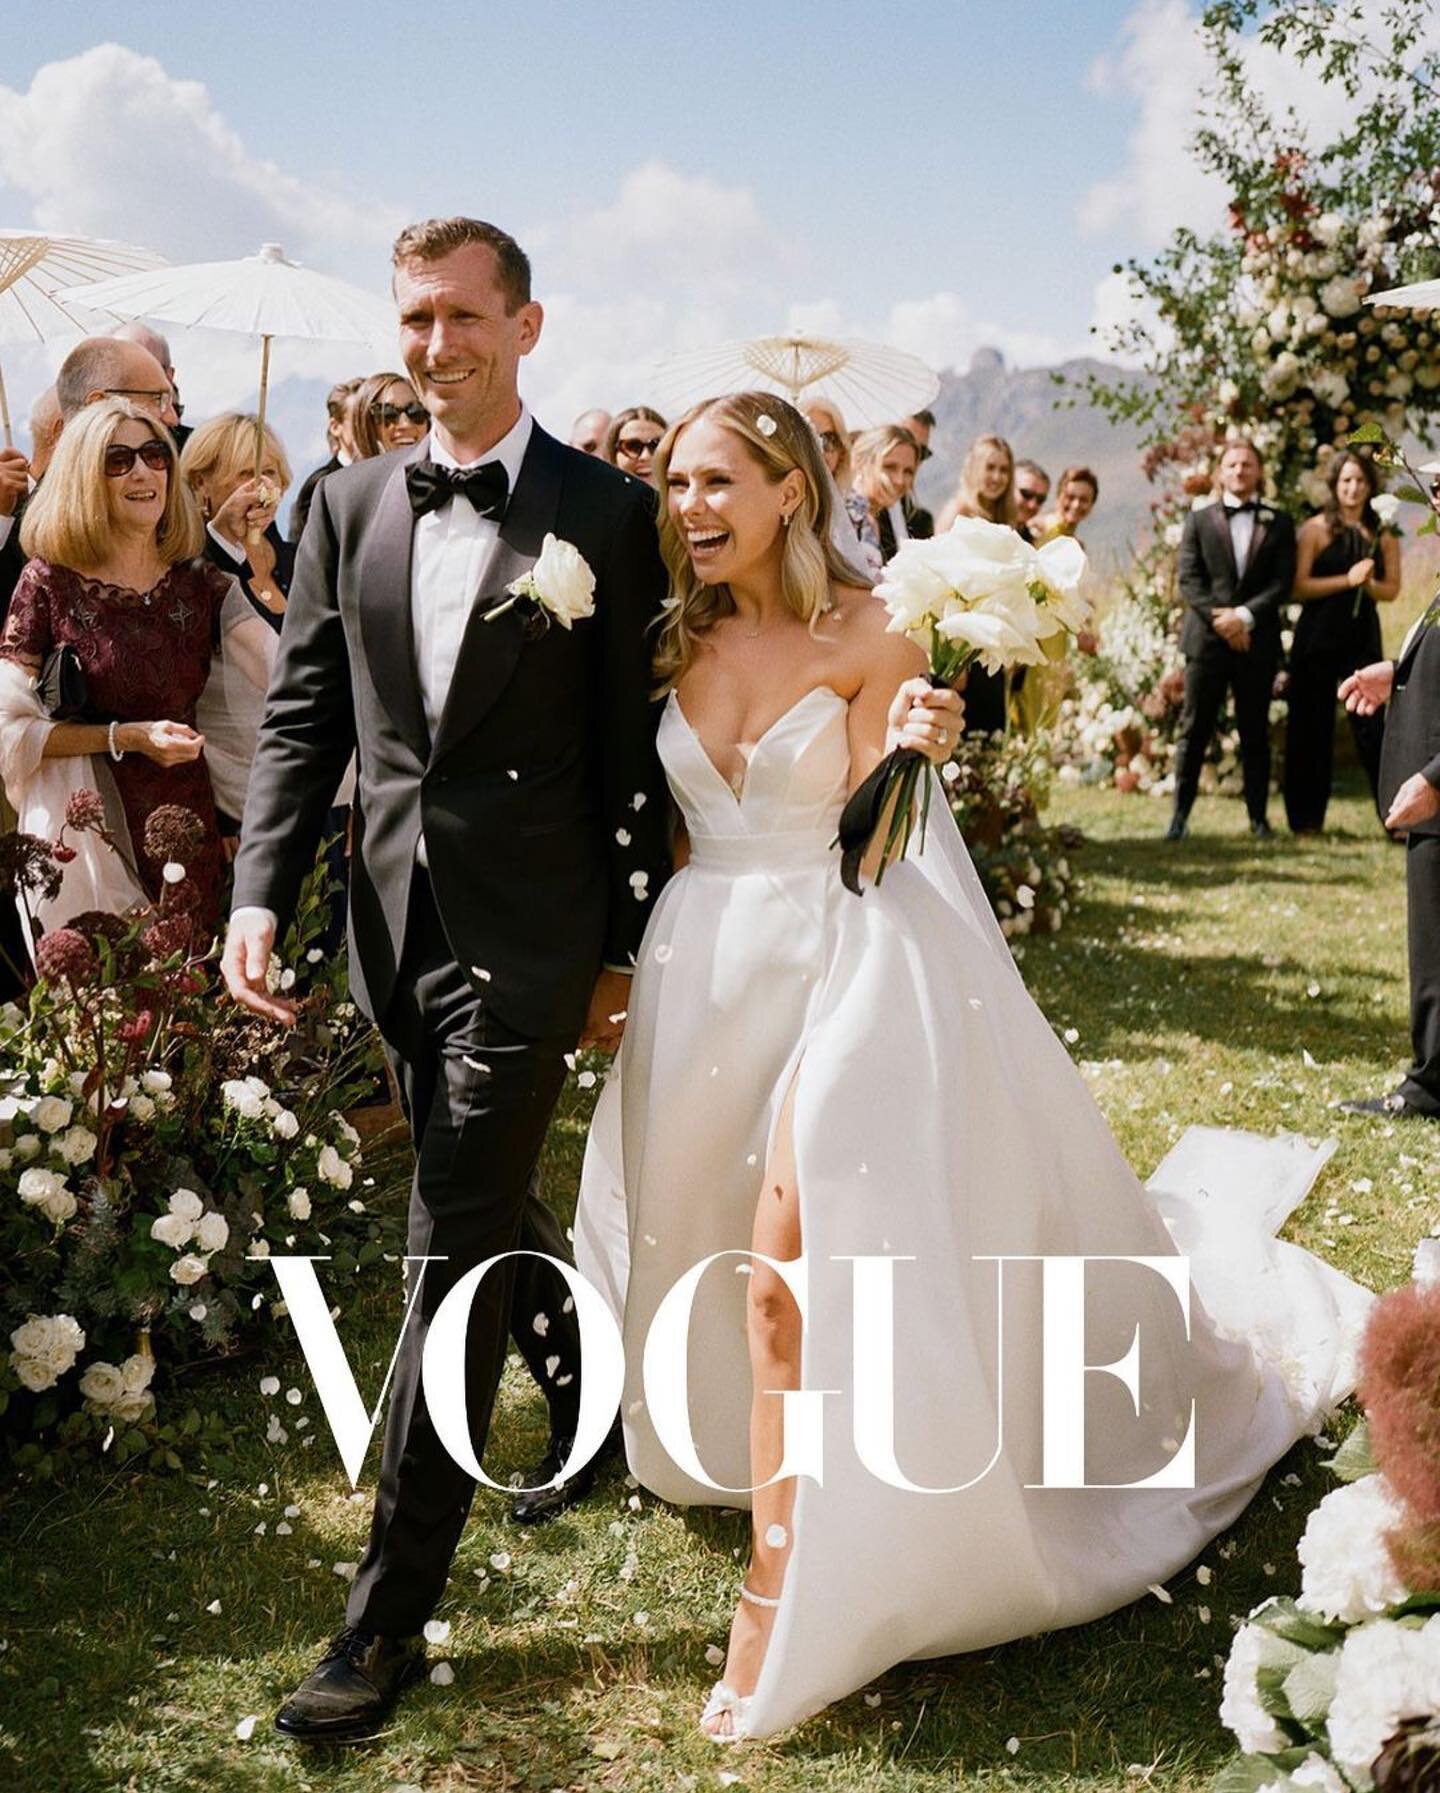 Australian VOGUE // &ldquo;It makes my heart sing whenever our celebrations are celebrated in such iconic publications..&rdquo;via @islaandsmithbespokeevents 💛 

Here&rsquo;s our darlings @charli_mac and Matt, high on mountain air captured on film b